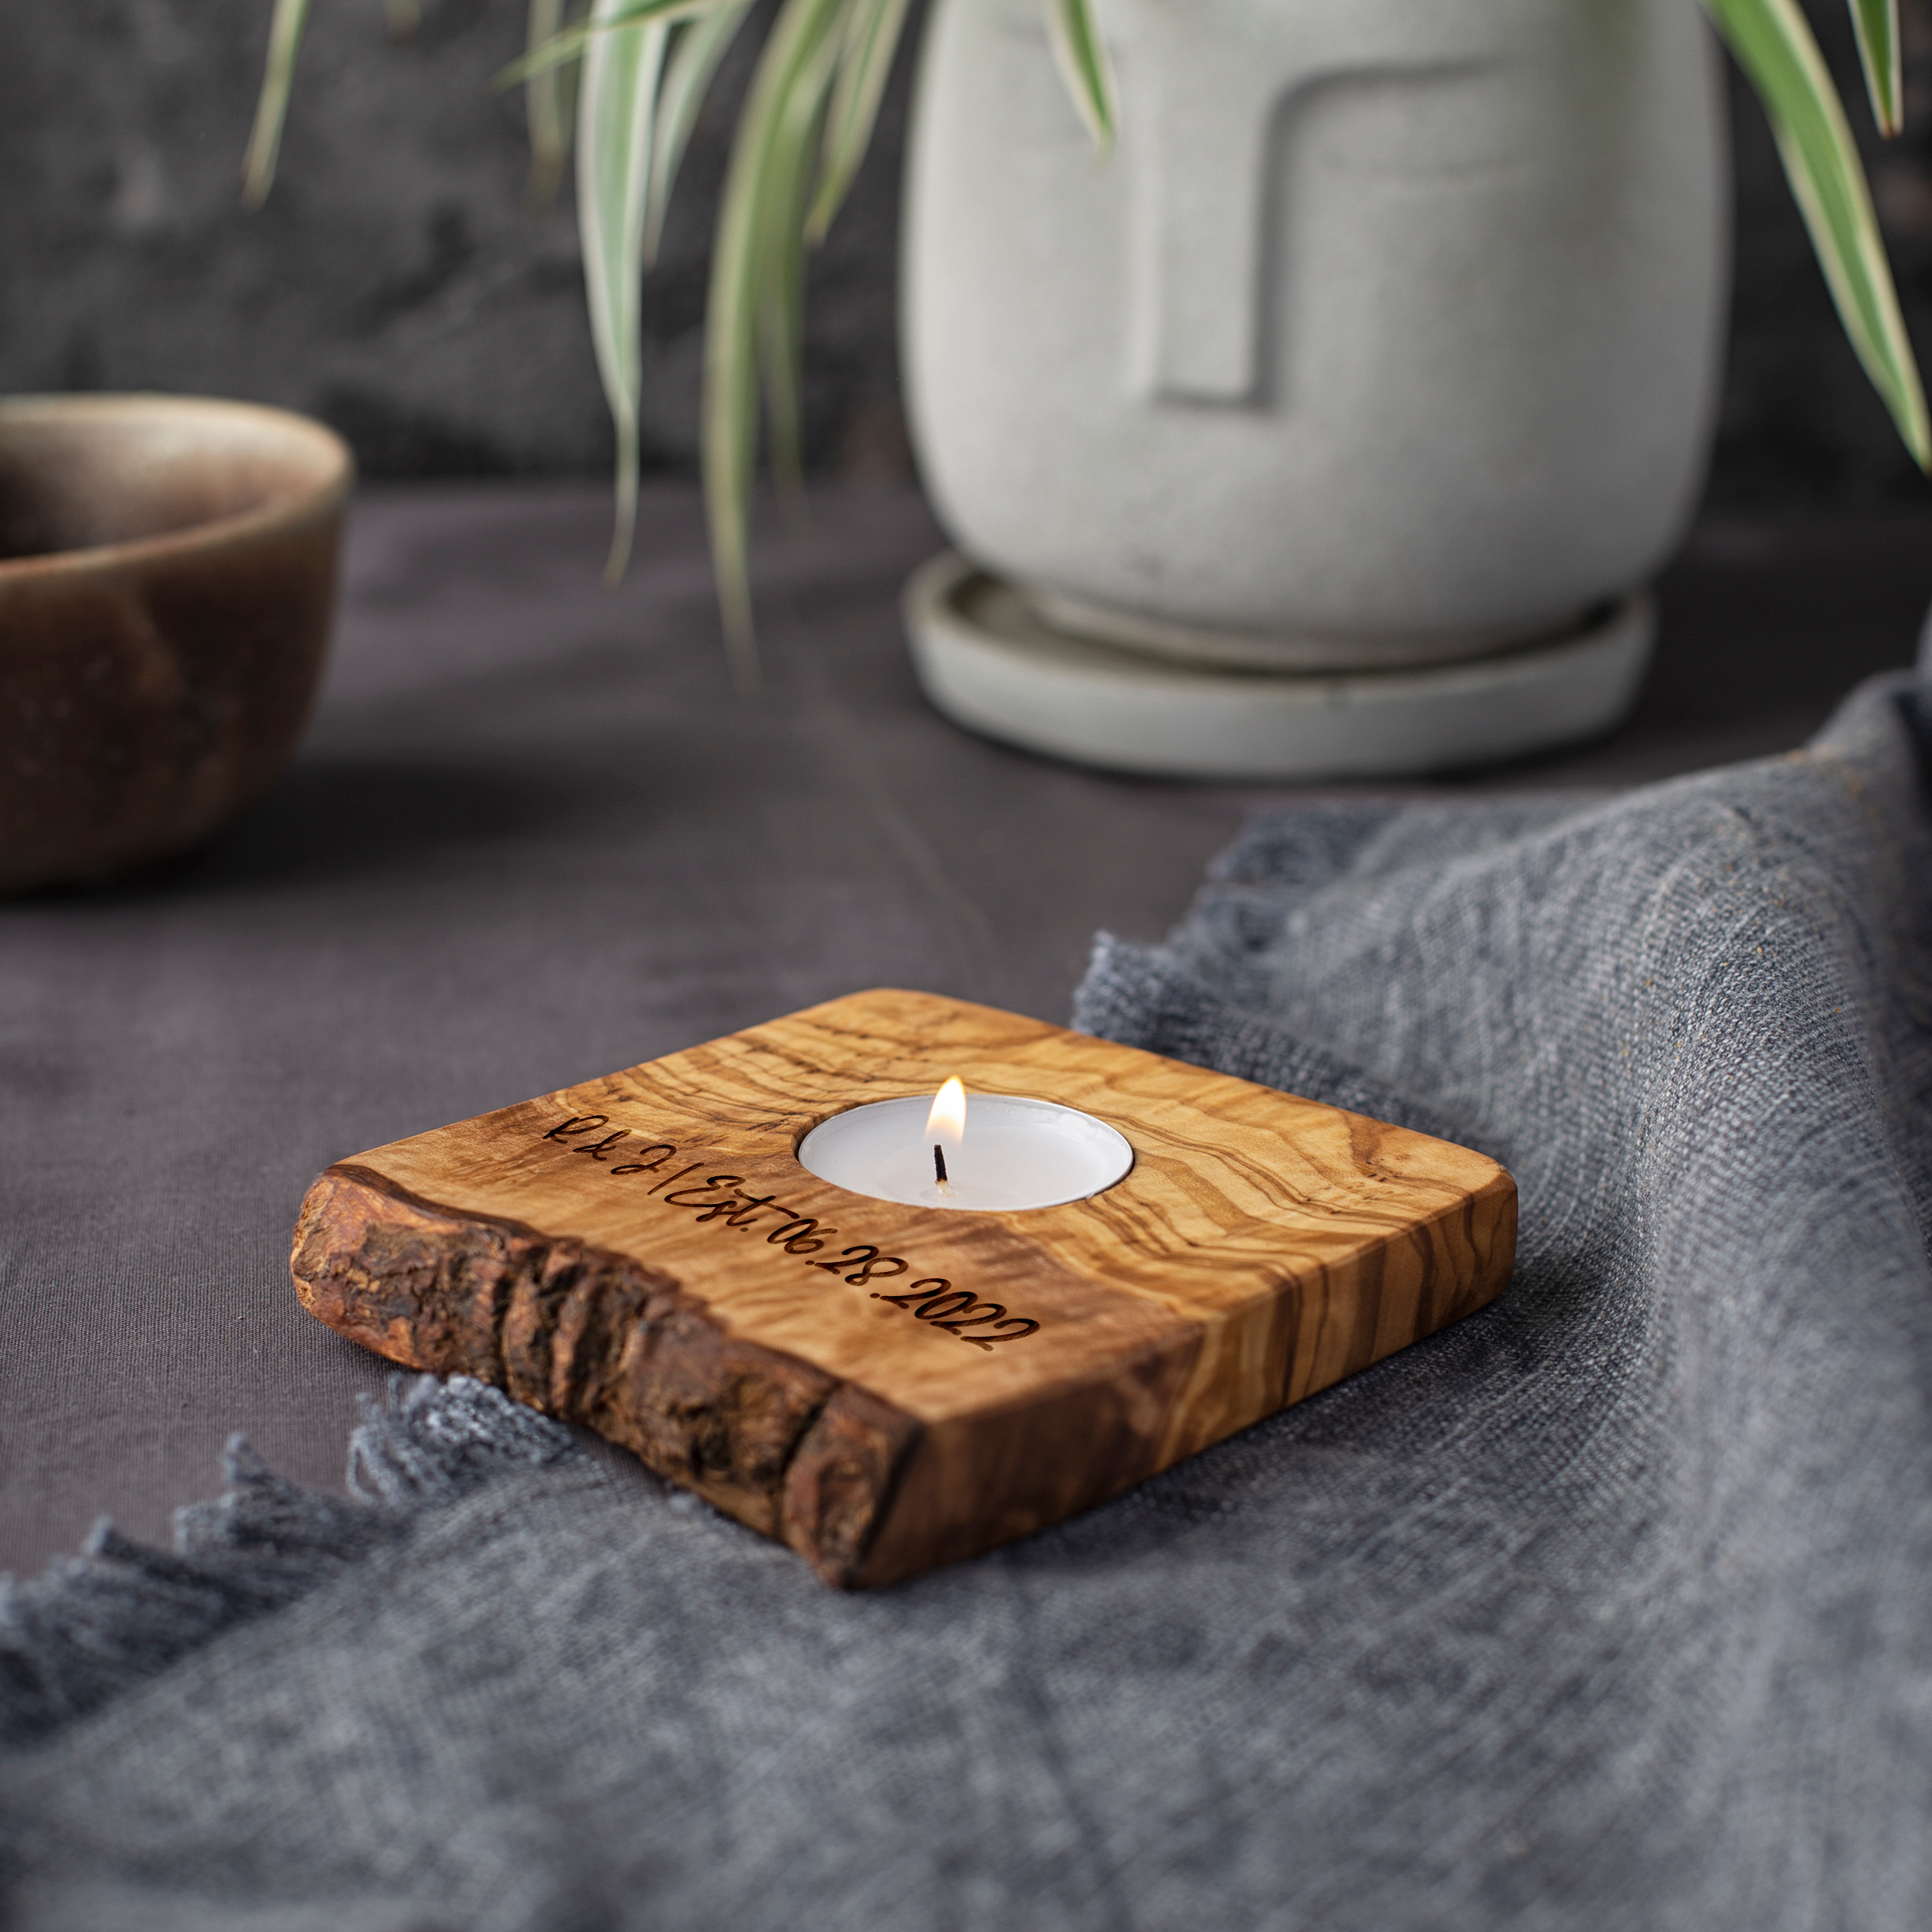 A live edge candle holder with engraved text.